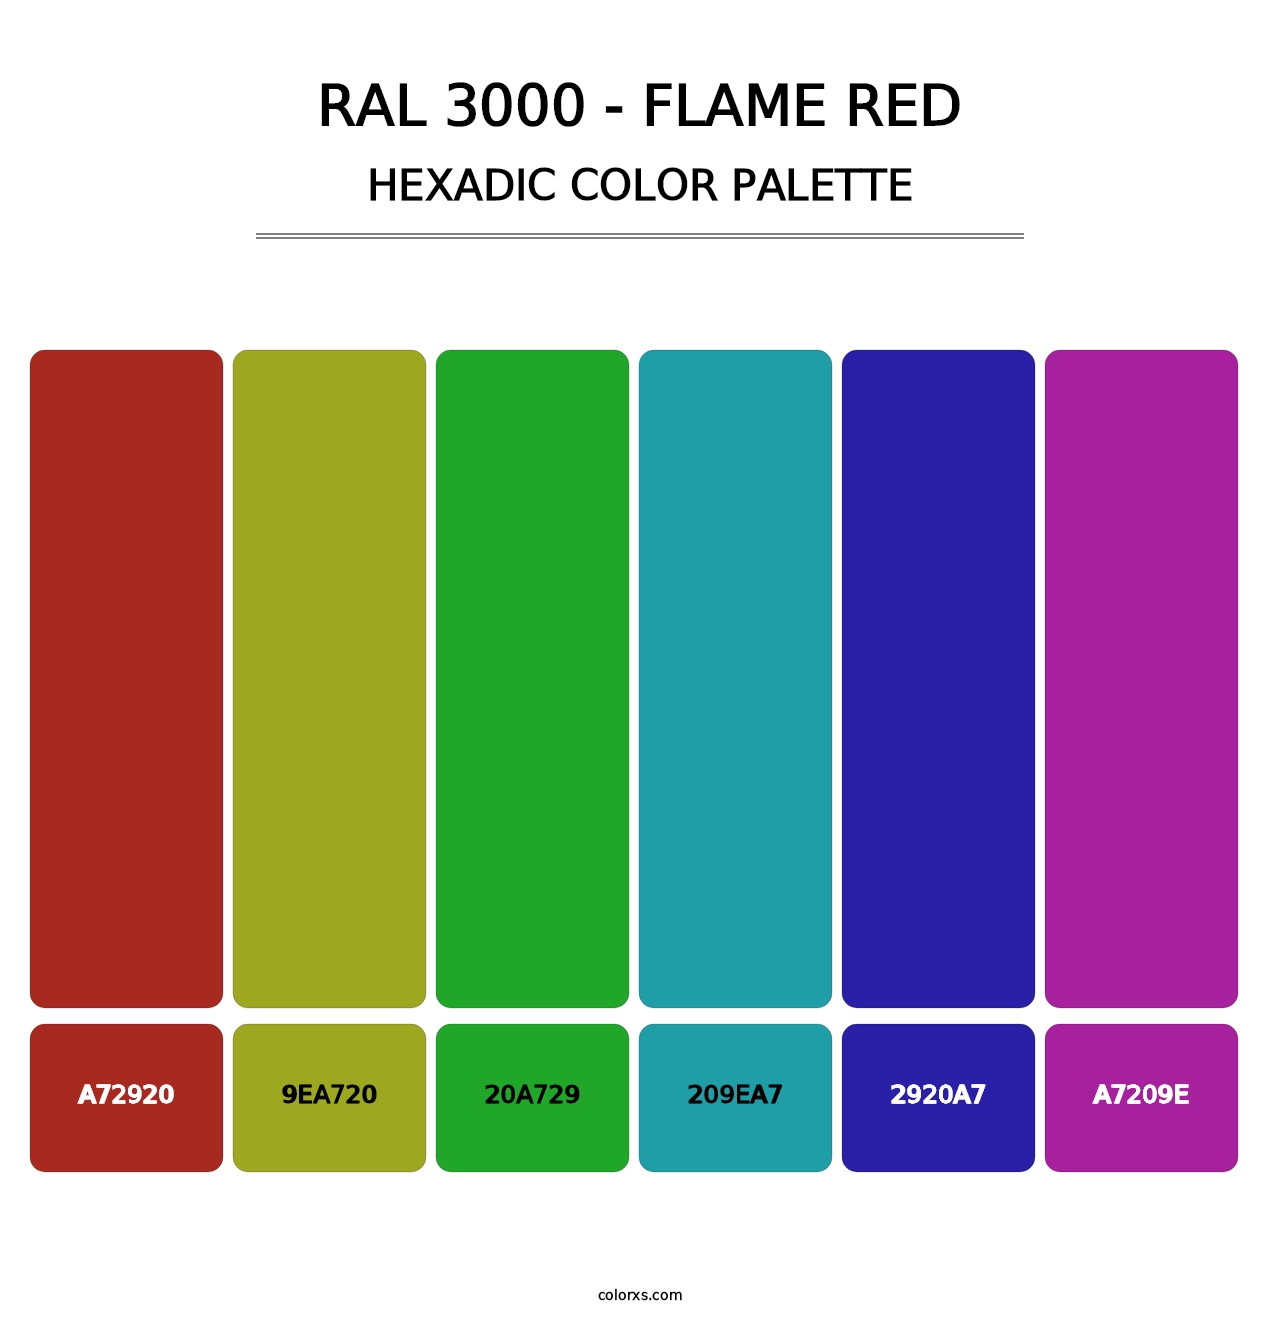 RAL 3000 - Flame Red - Hexadic Color Palette